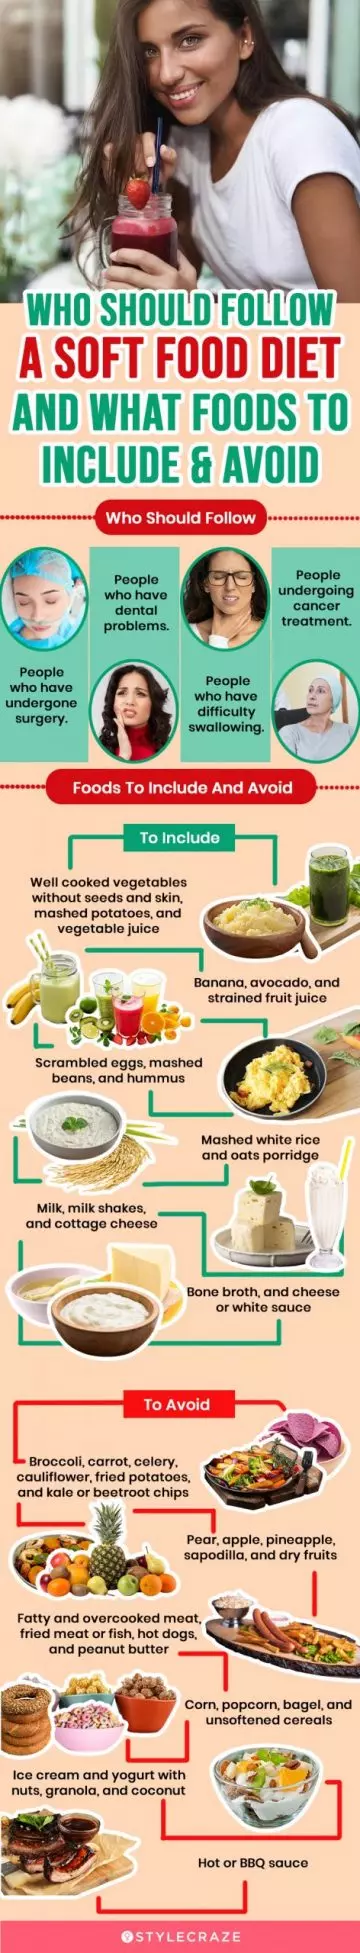 who should follow a soft food diet and what foods to include & avoid (infographic)